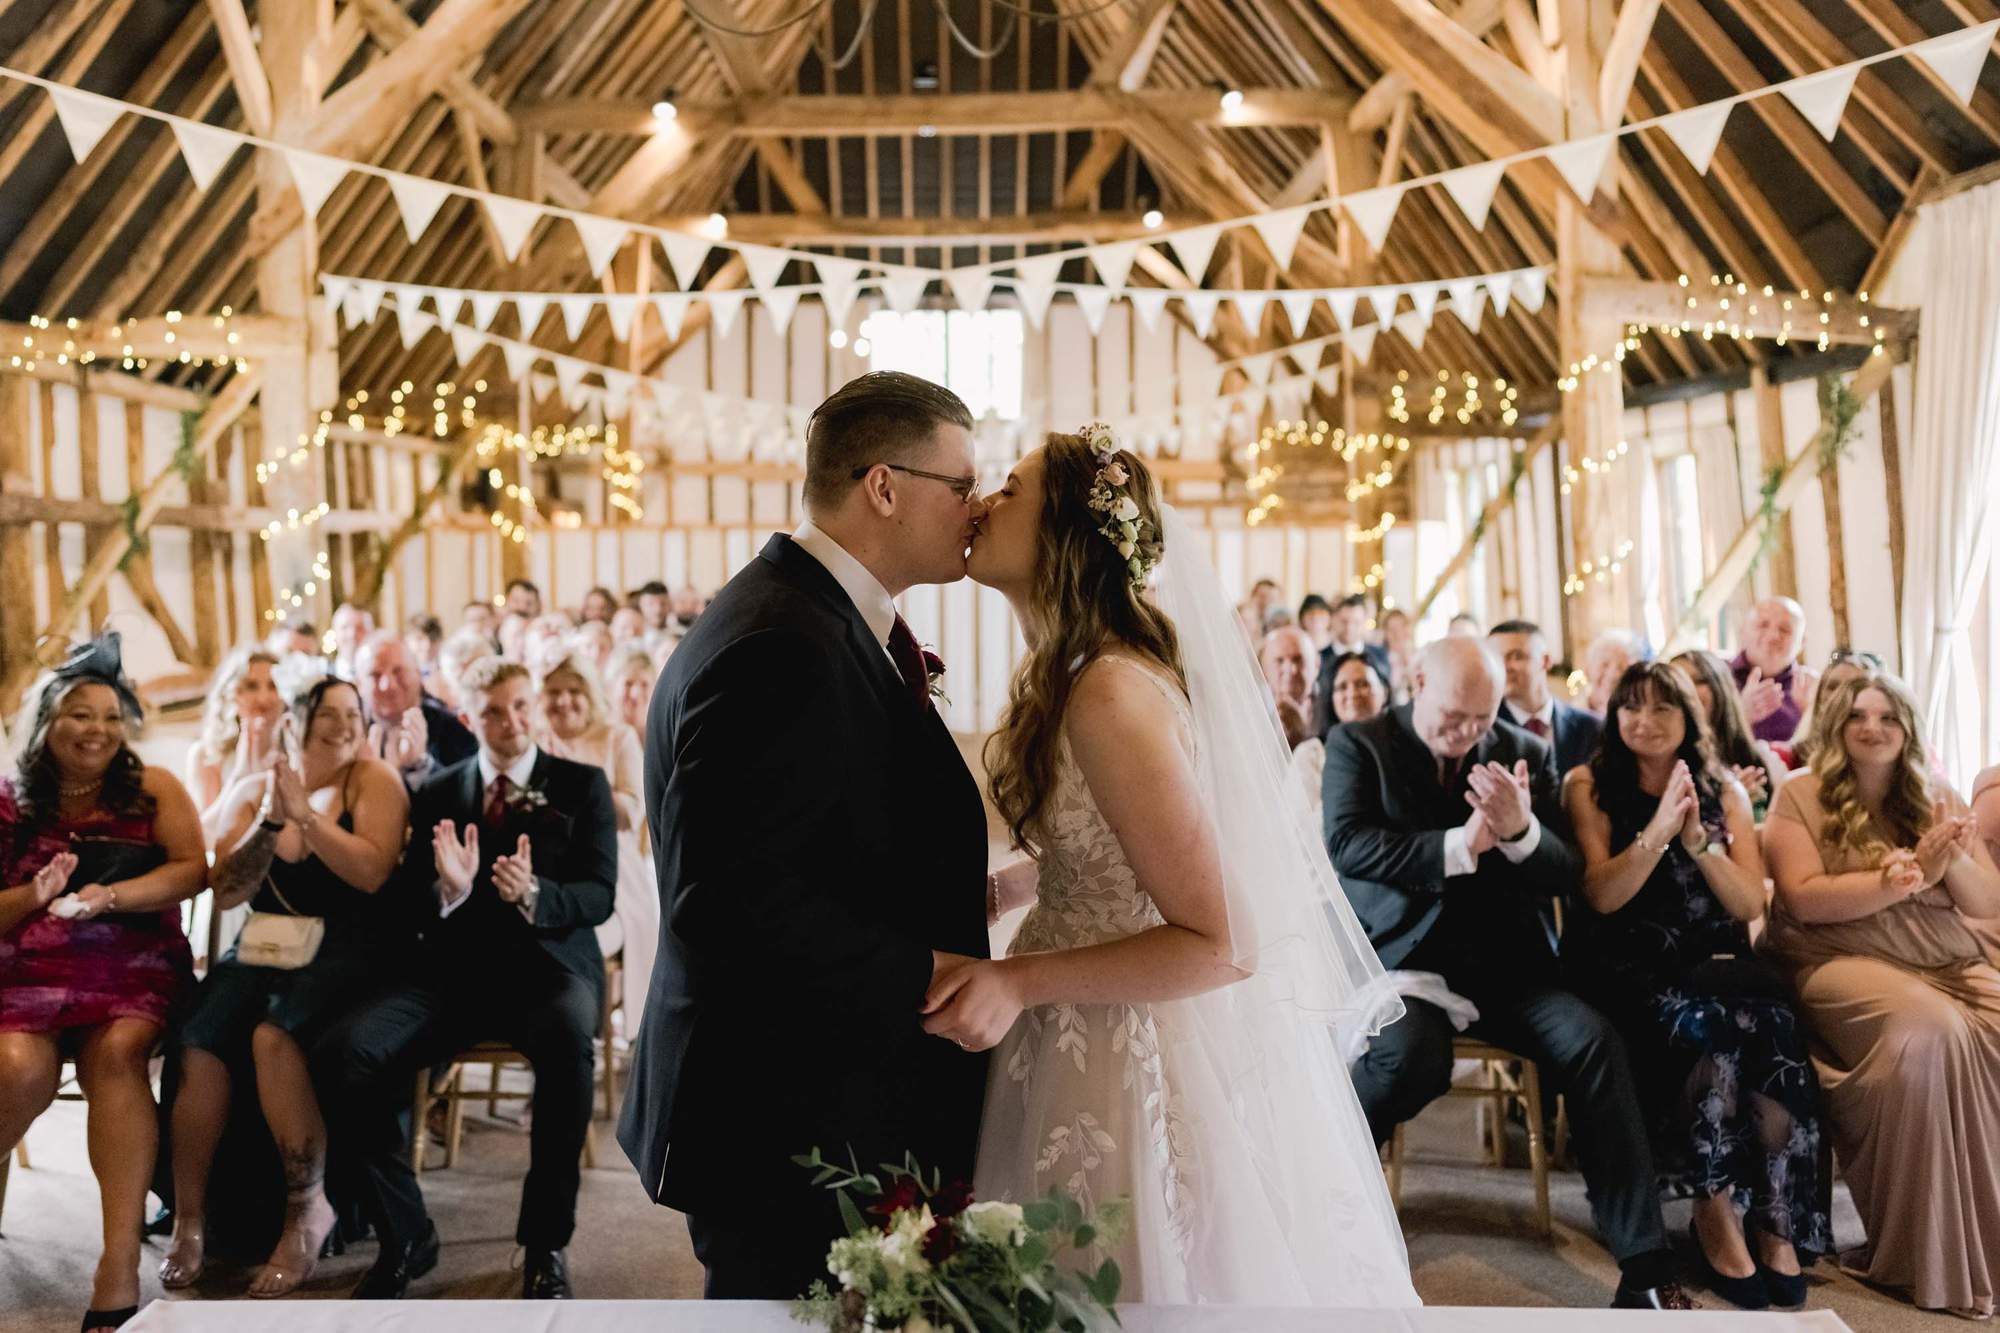 Bride and groomkiss during the ceremony on their wedding day at the Clock Barn venue in Hampshire.